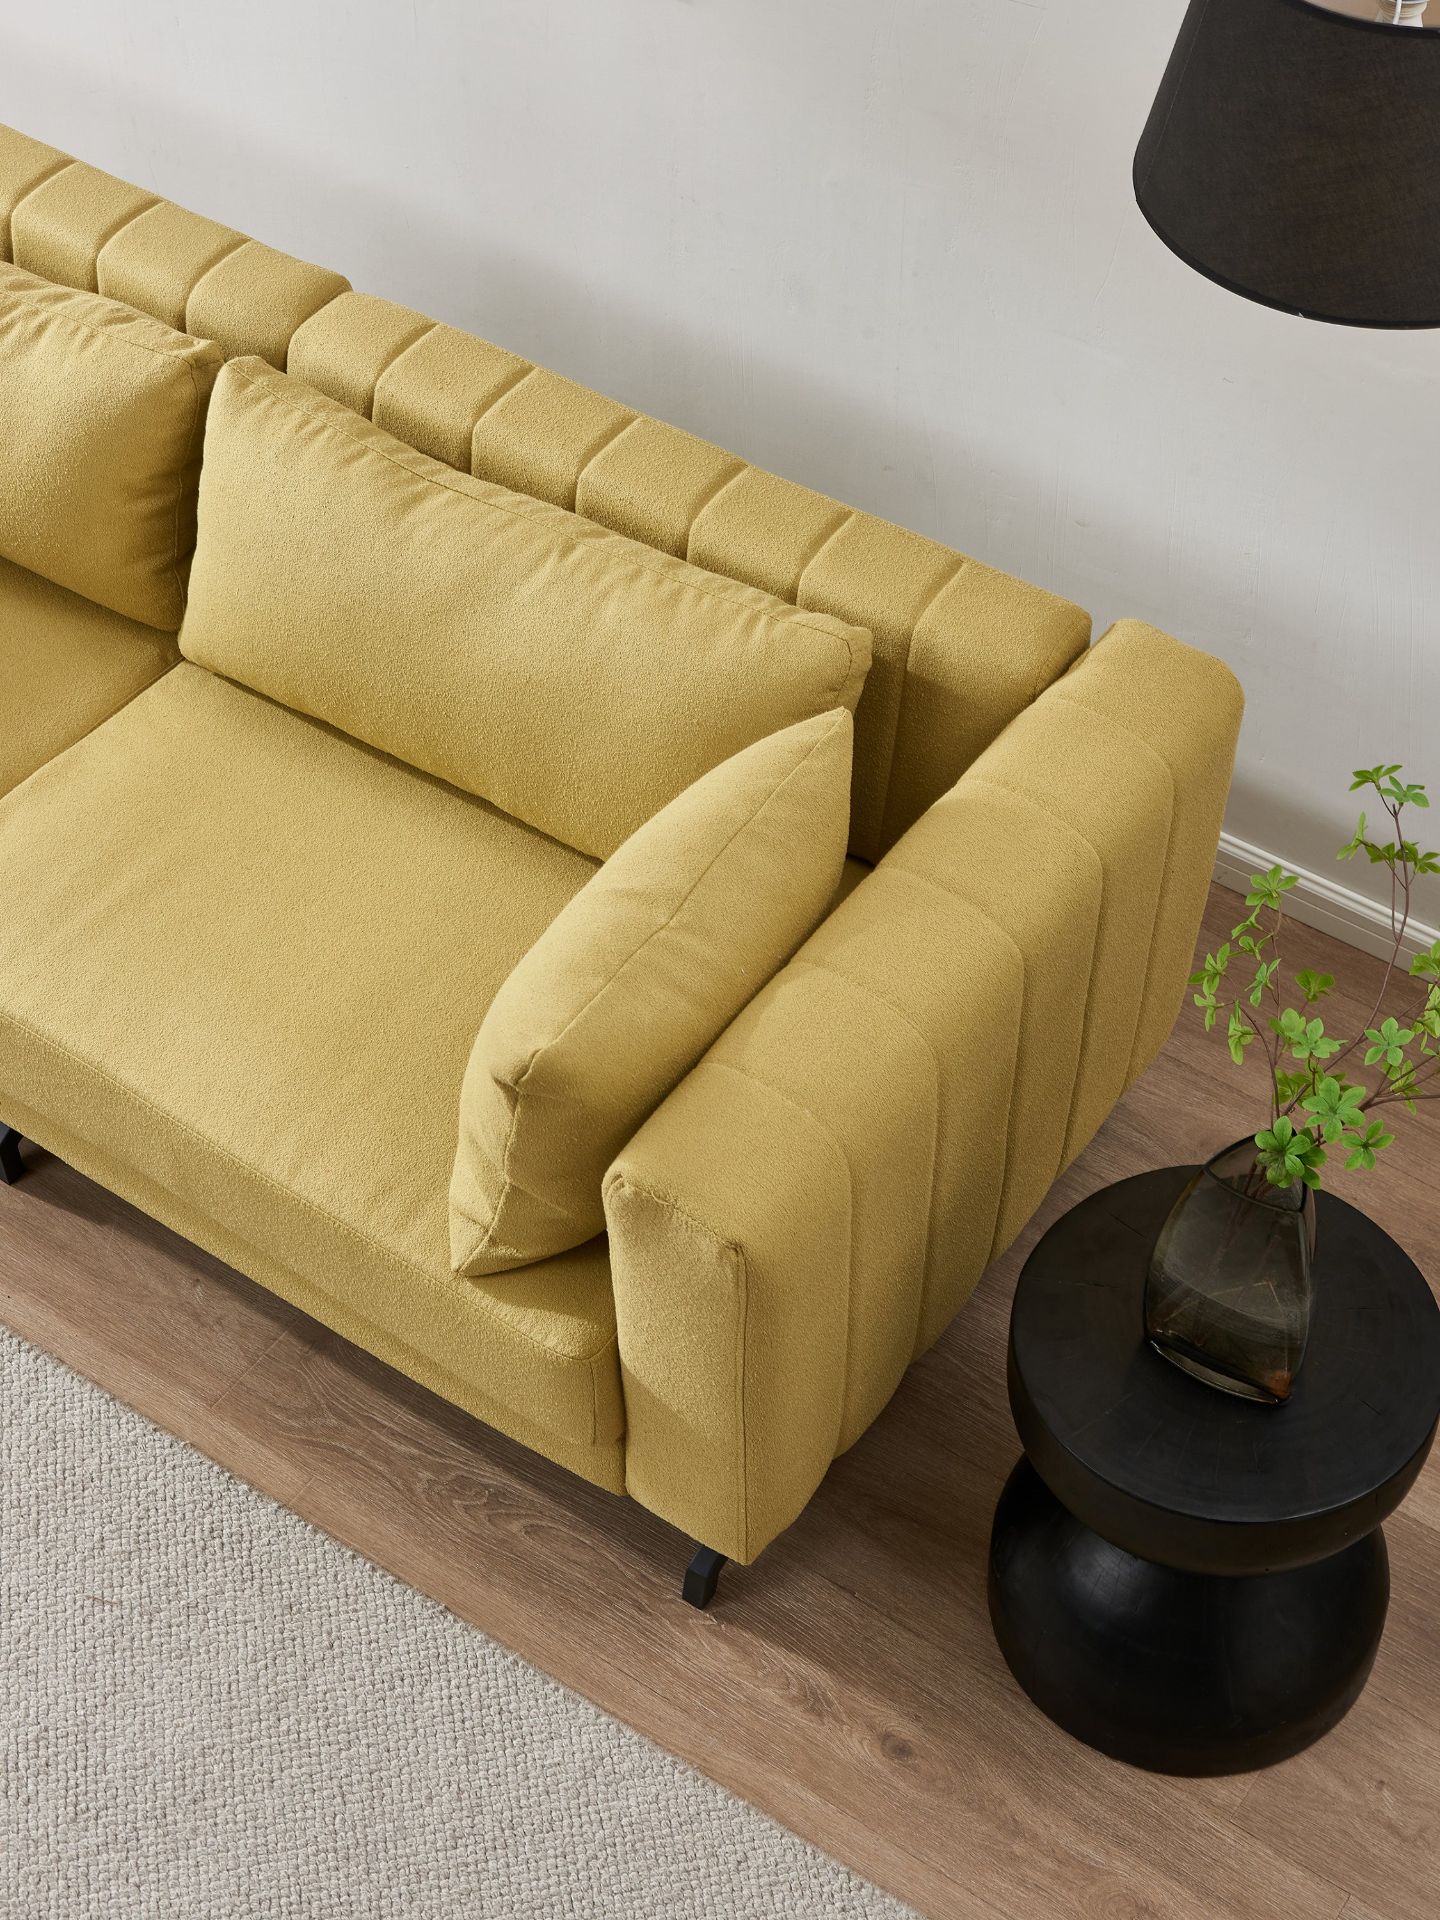 Living  Room  Sofa Couch with Metal Legs Yellow Fabric Môdern Space Gallery